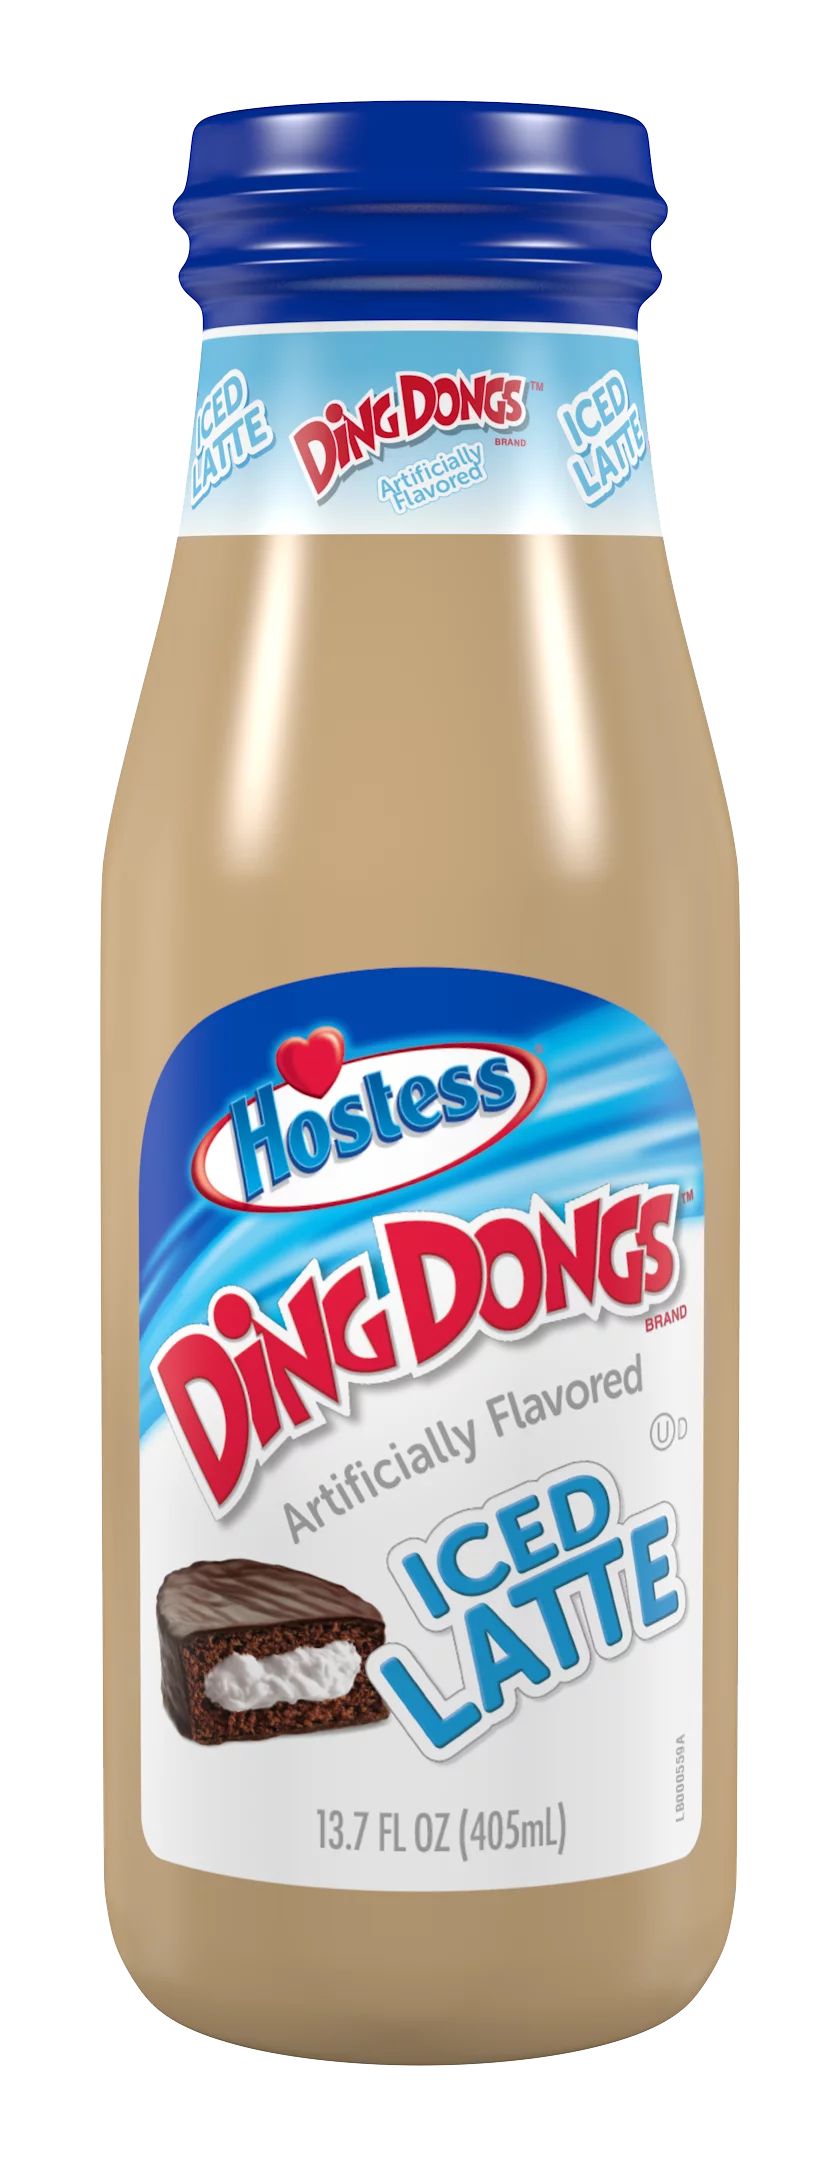 Hostess Ding Dongs Iced Latte 405ml - 12ct